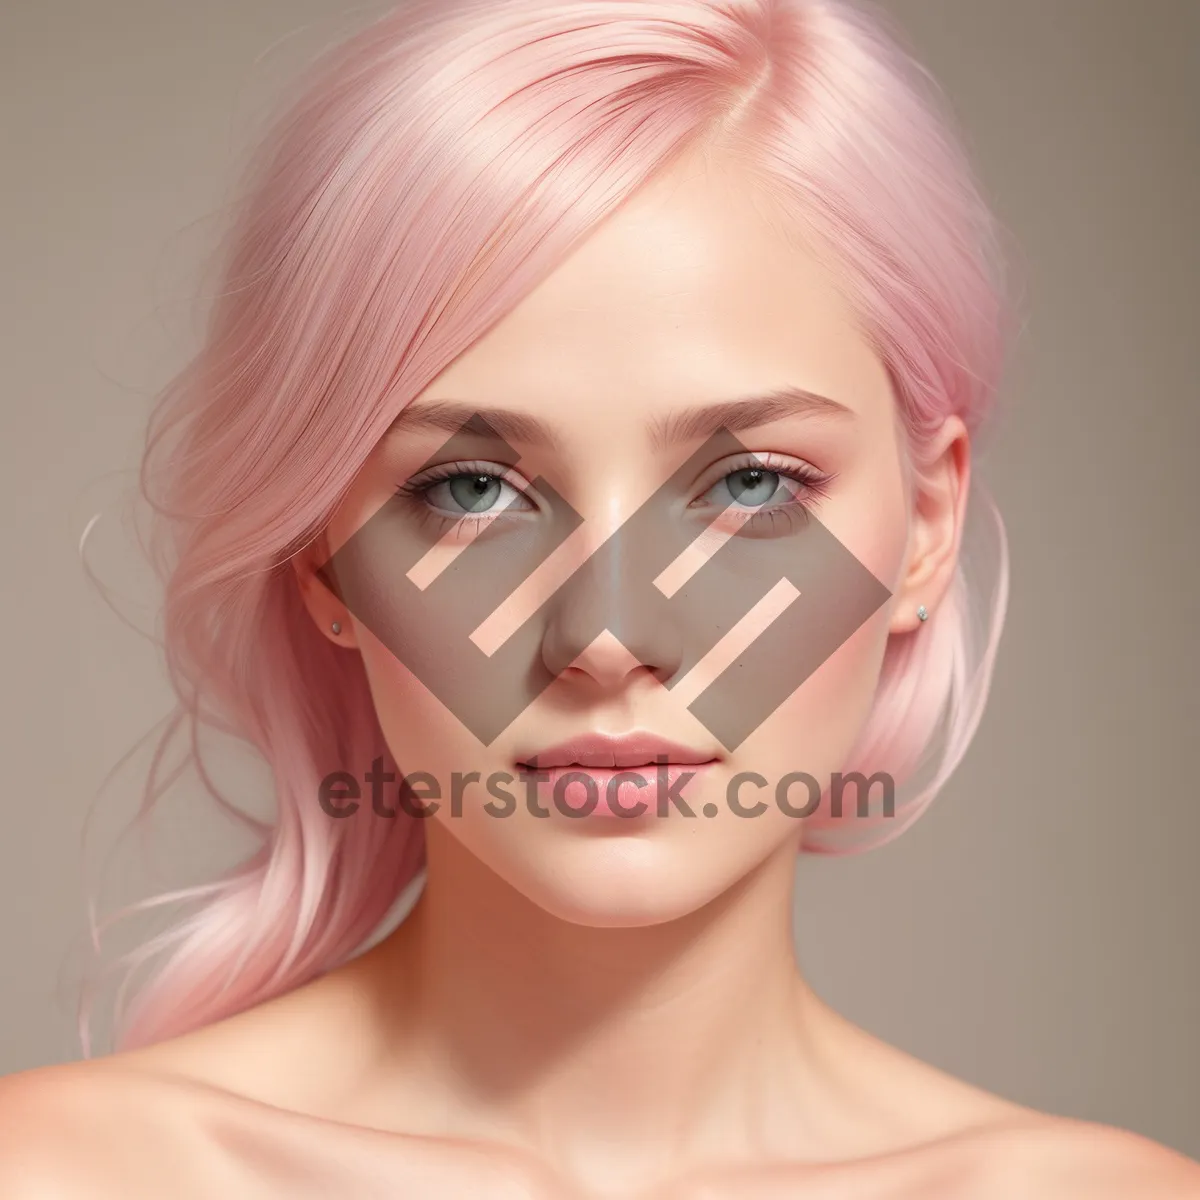 Picture of Radiant Beauty: Closeup Portrait of a Gorgeous Blond Lady